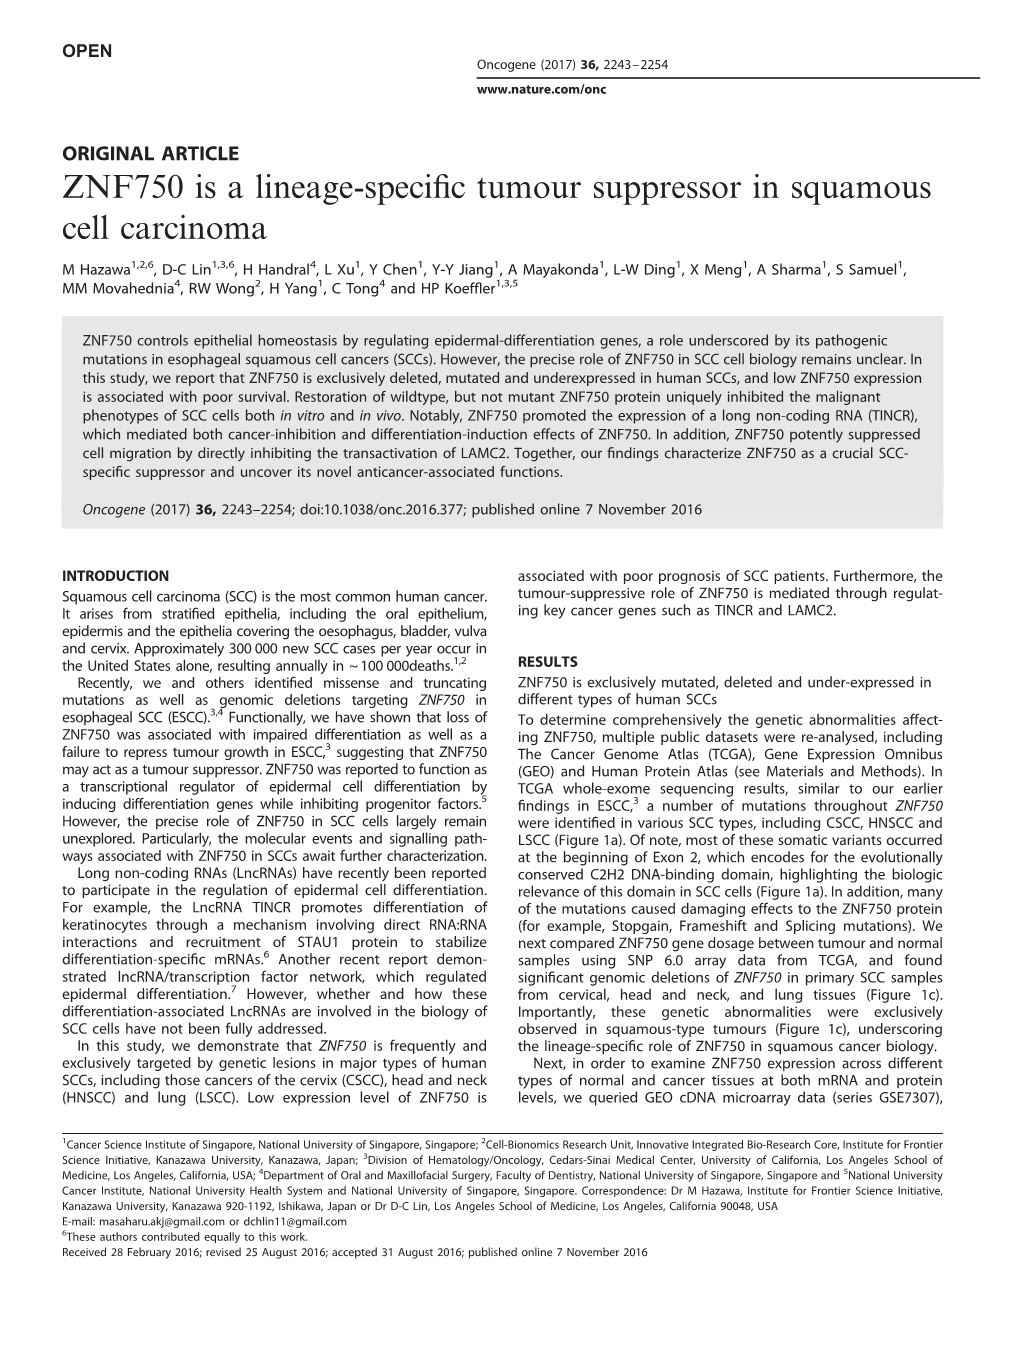 ZNF750 Is a Lineage-Specific Tumour Suppressor in Squamous Cell